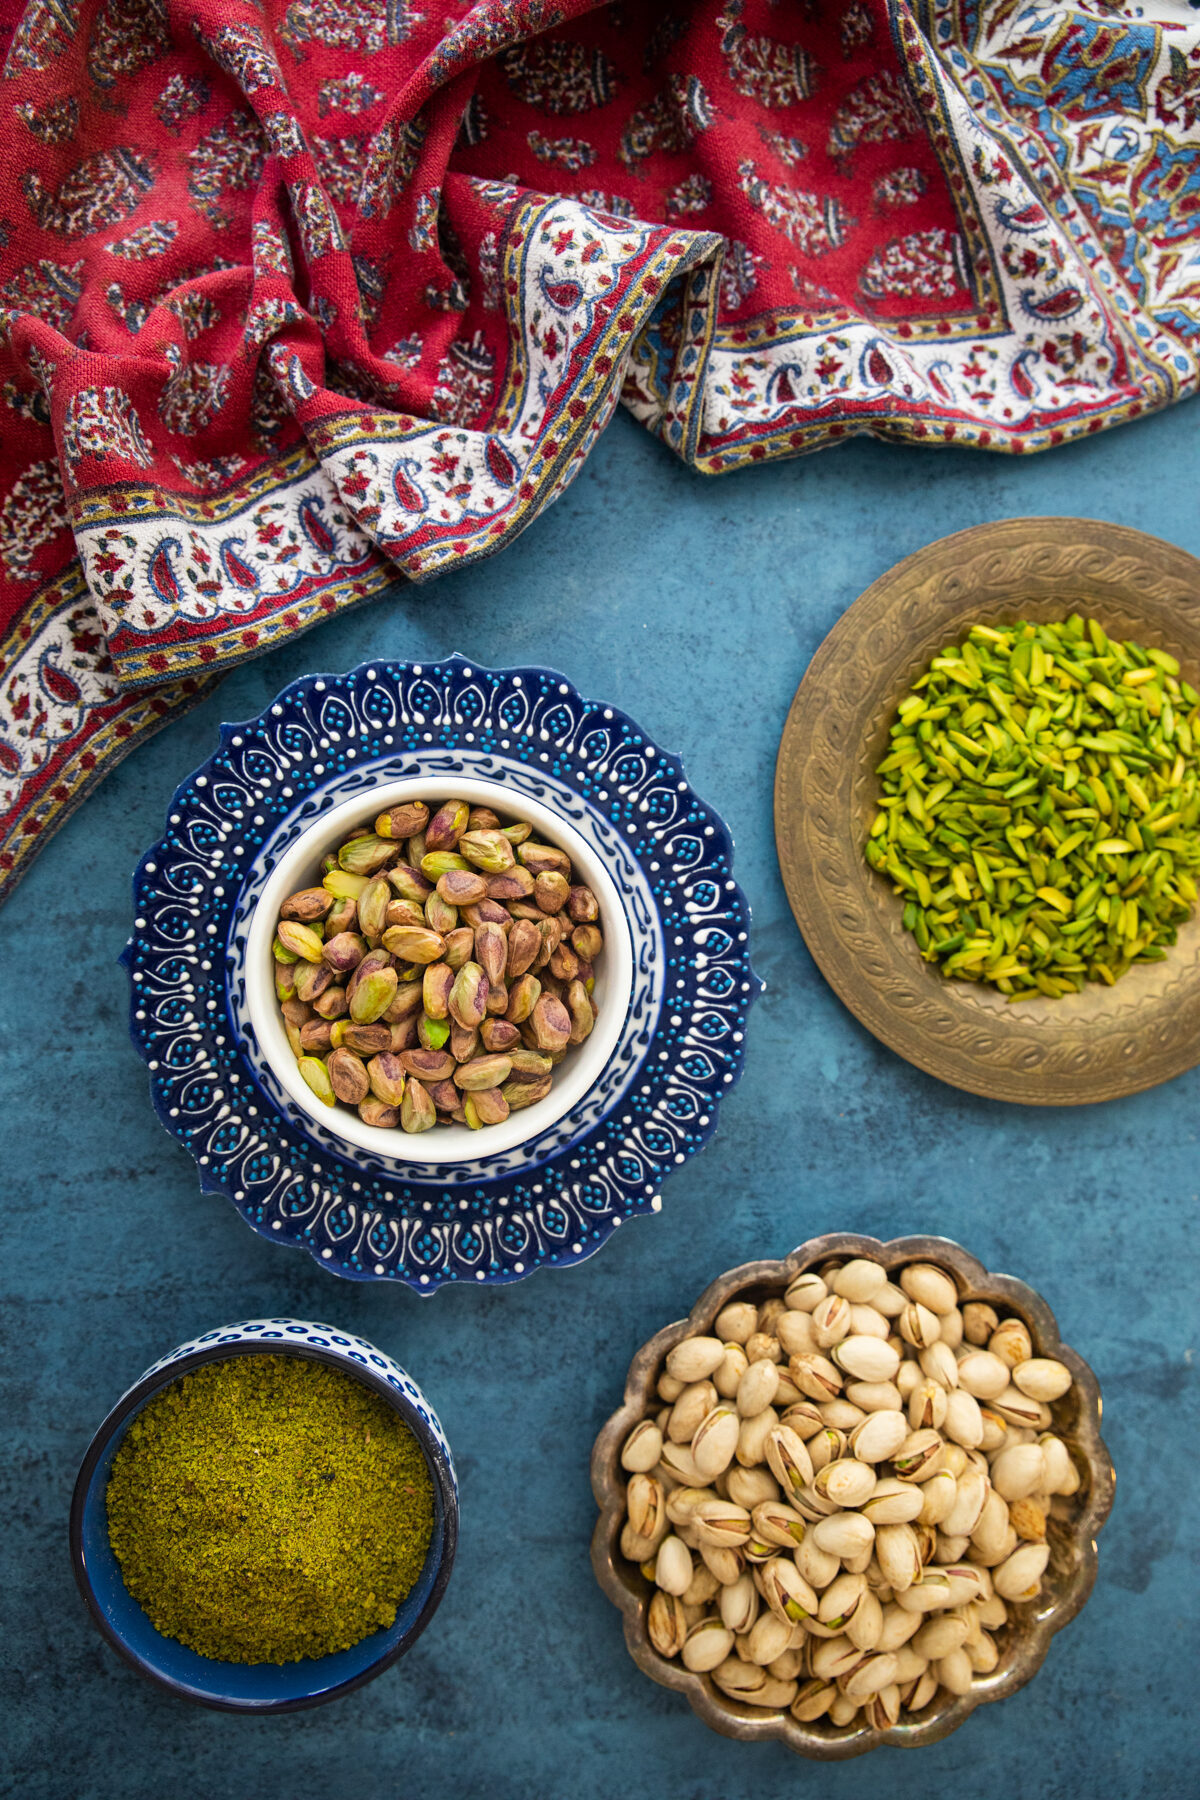 Pistachios come in different forms including shelled, unshelled, powdered and slivered.